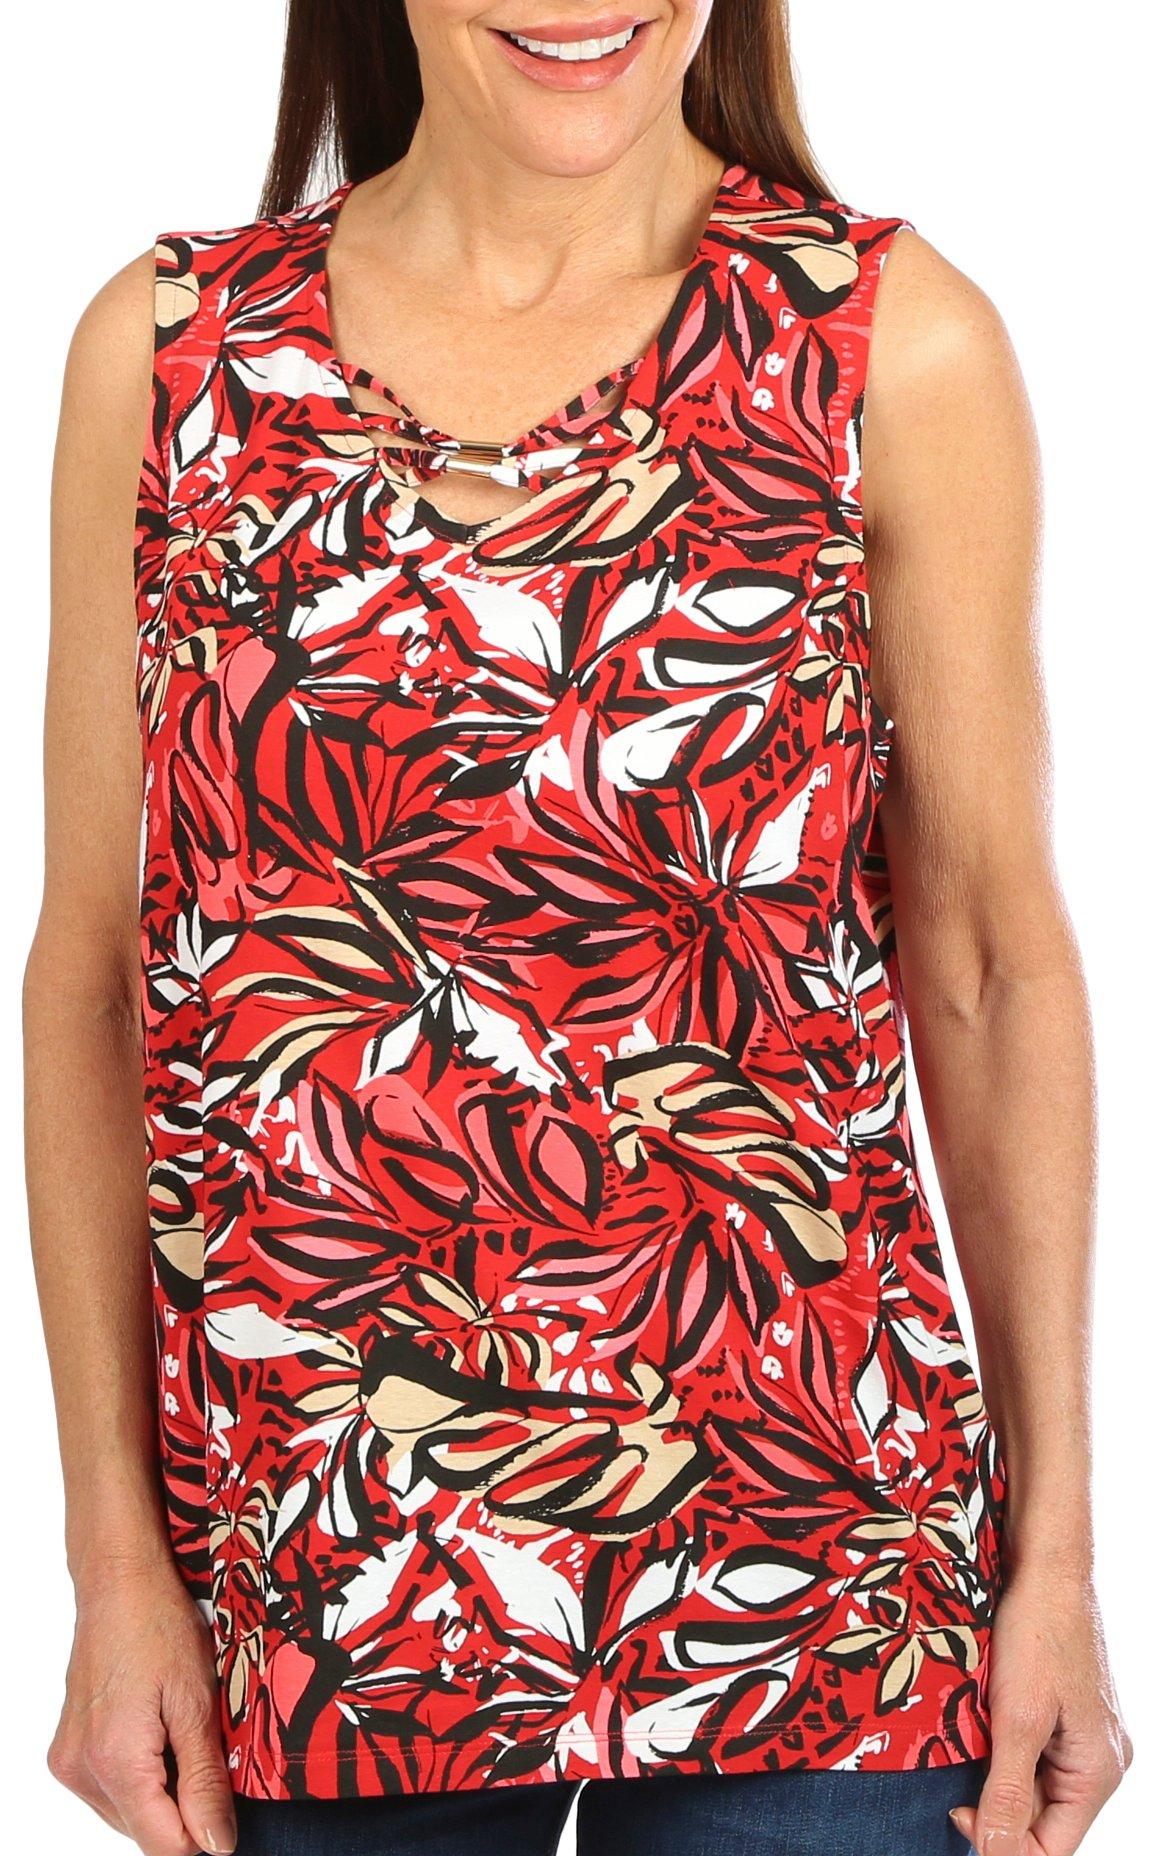 Coral Bay Womens V-Neck Wild Floral Sleeveless Top